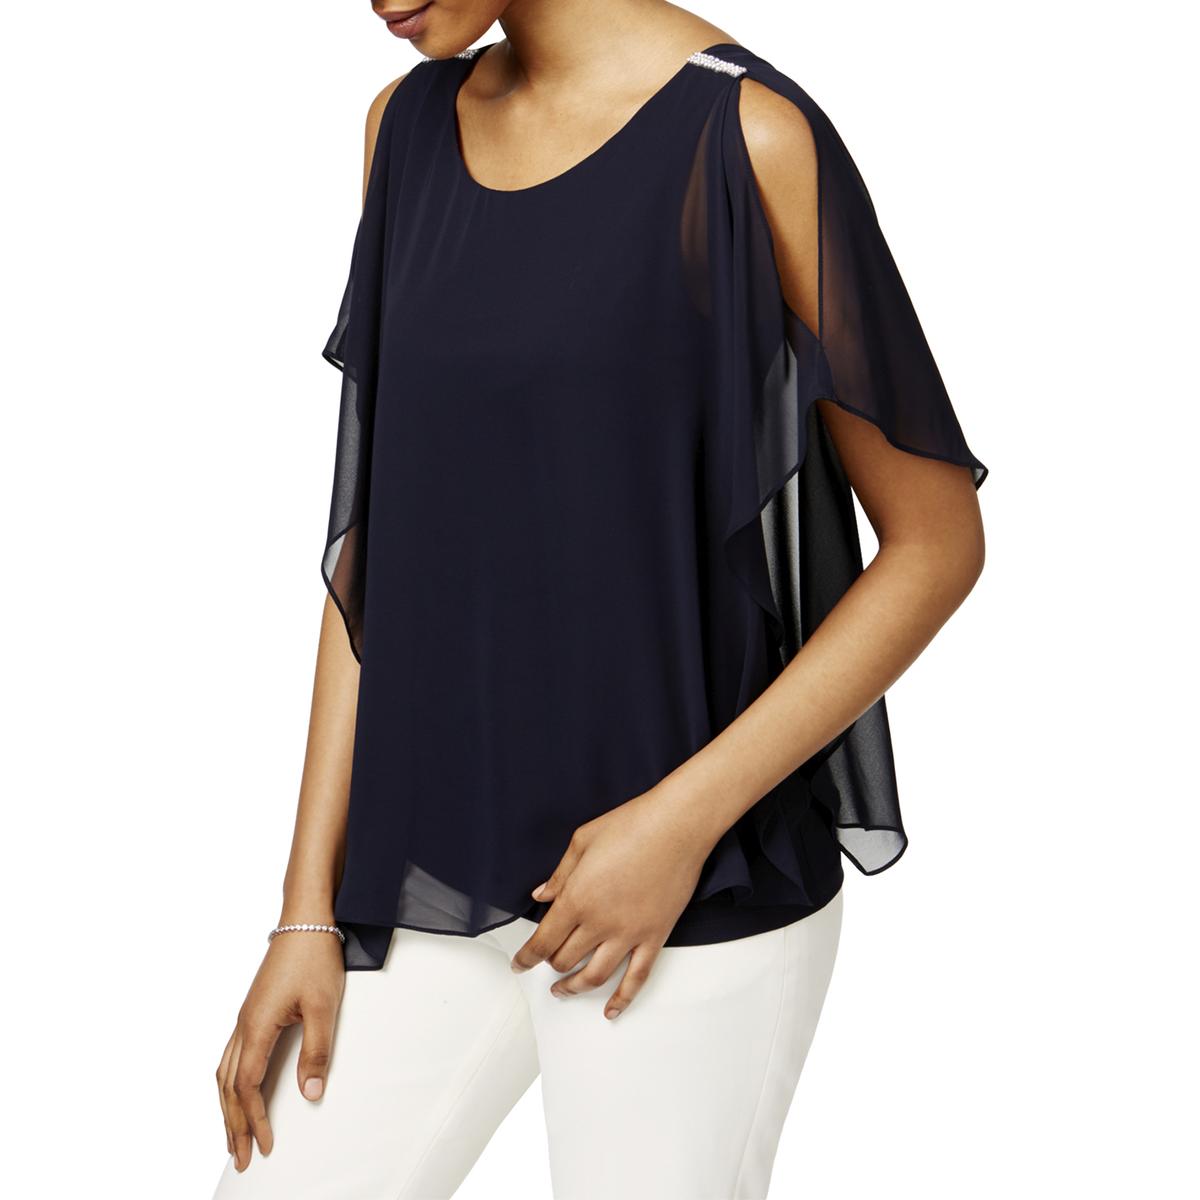 MSK Womens Navy Chiffon Embellished Cold Shoulder Casual Top L BHFO ...